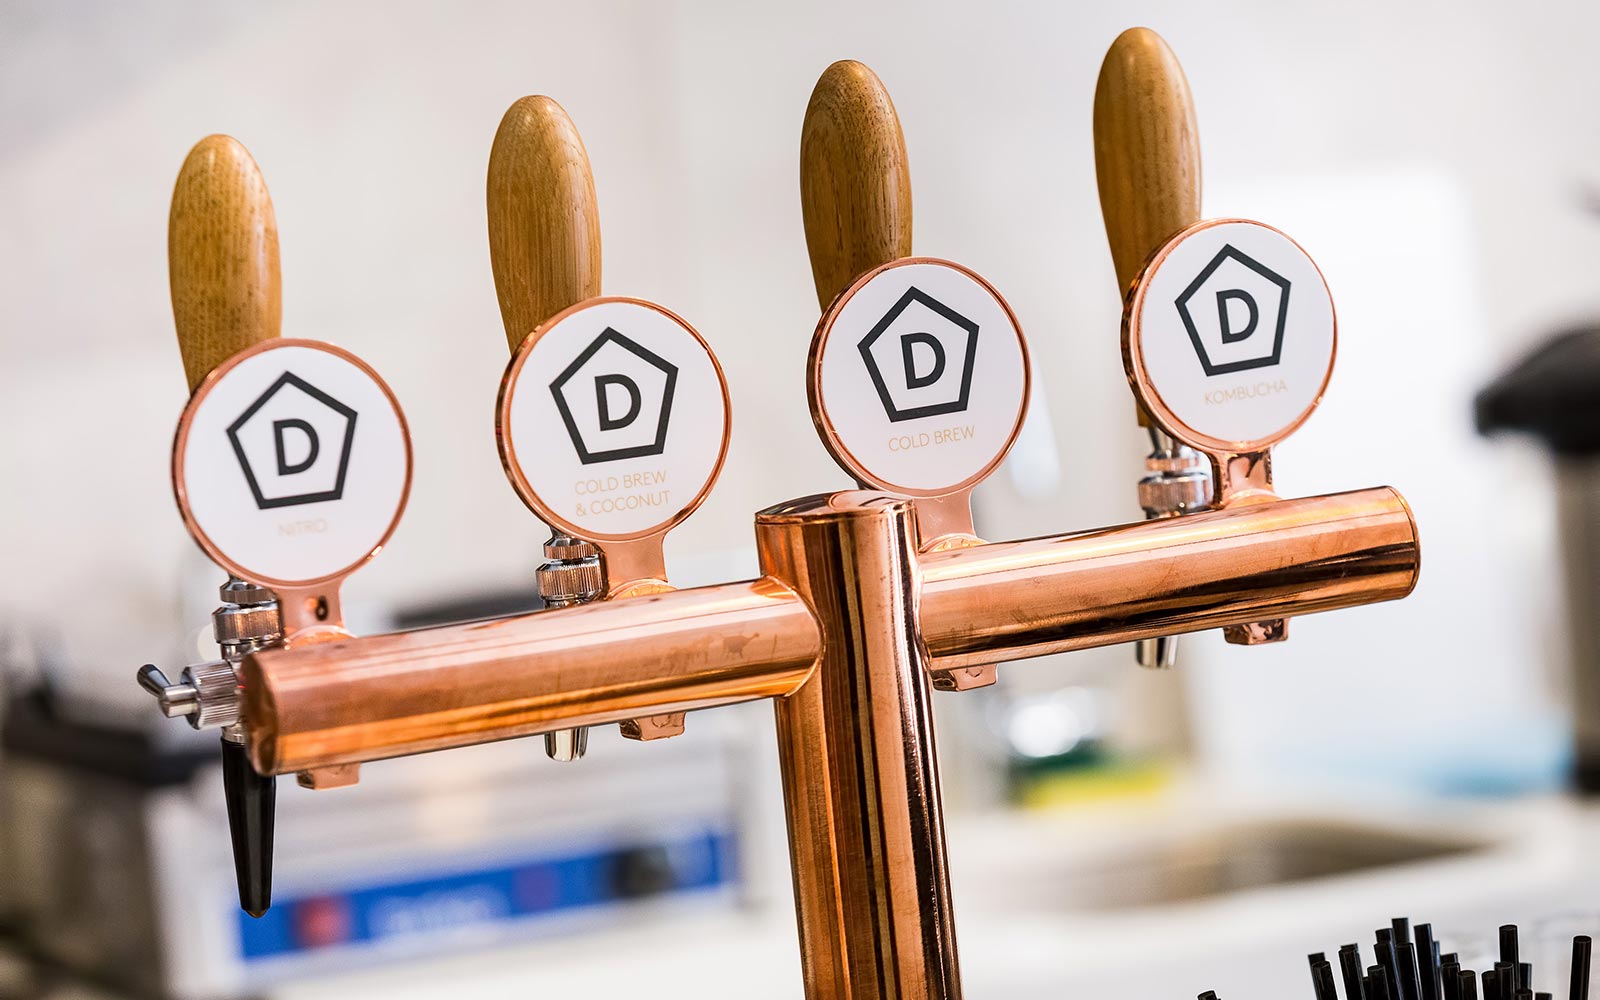 Danes Coffee on Tap